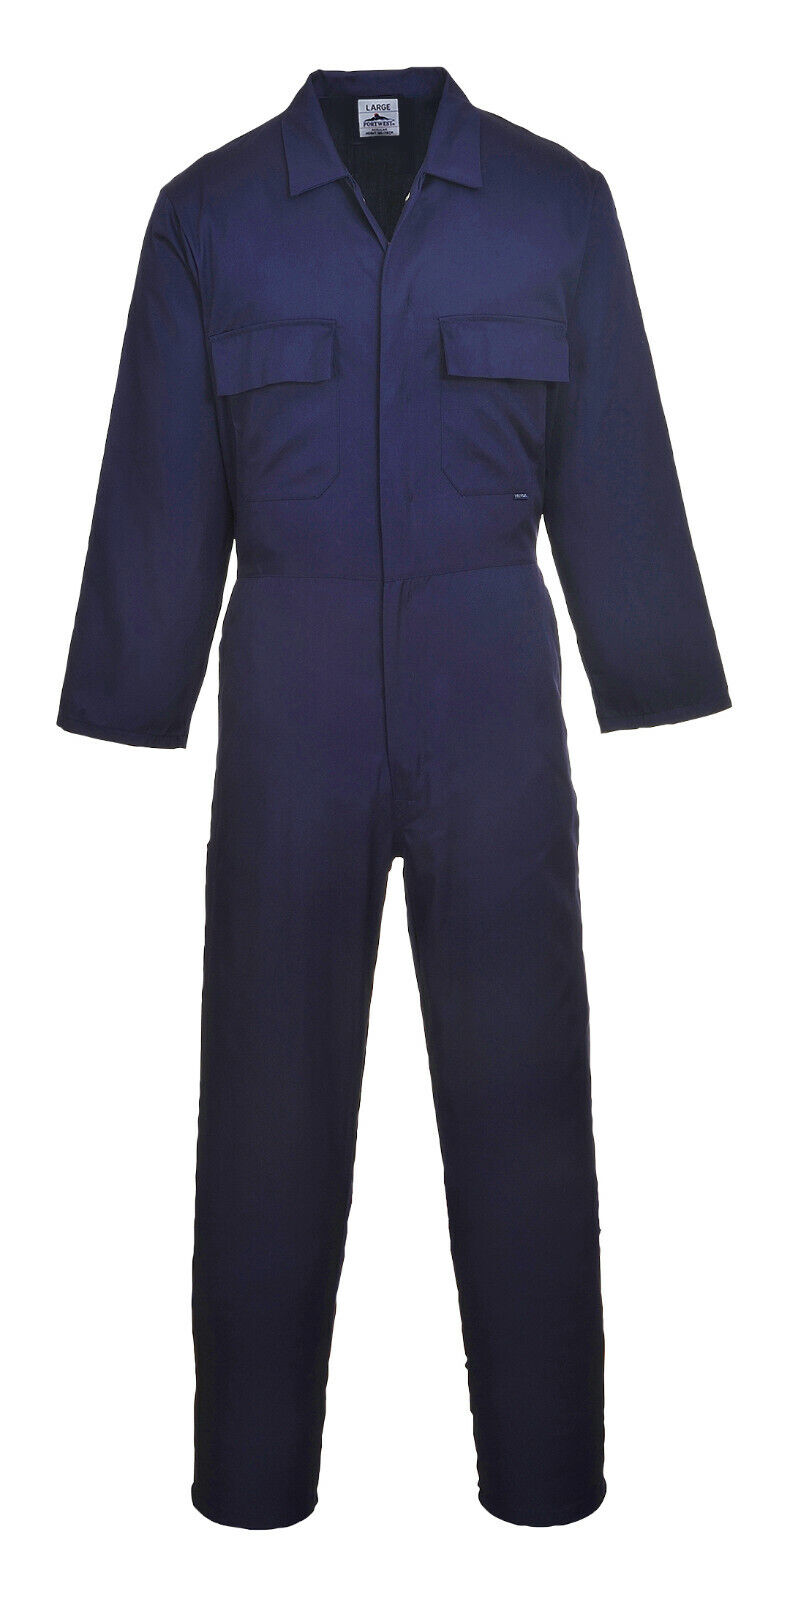 Portwest S999 Euro Work Polycotton Coverall Mechanic Jumpsuit Safety Overalls PORTWEST S999 - фотография #3